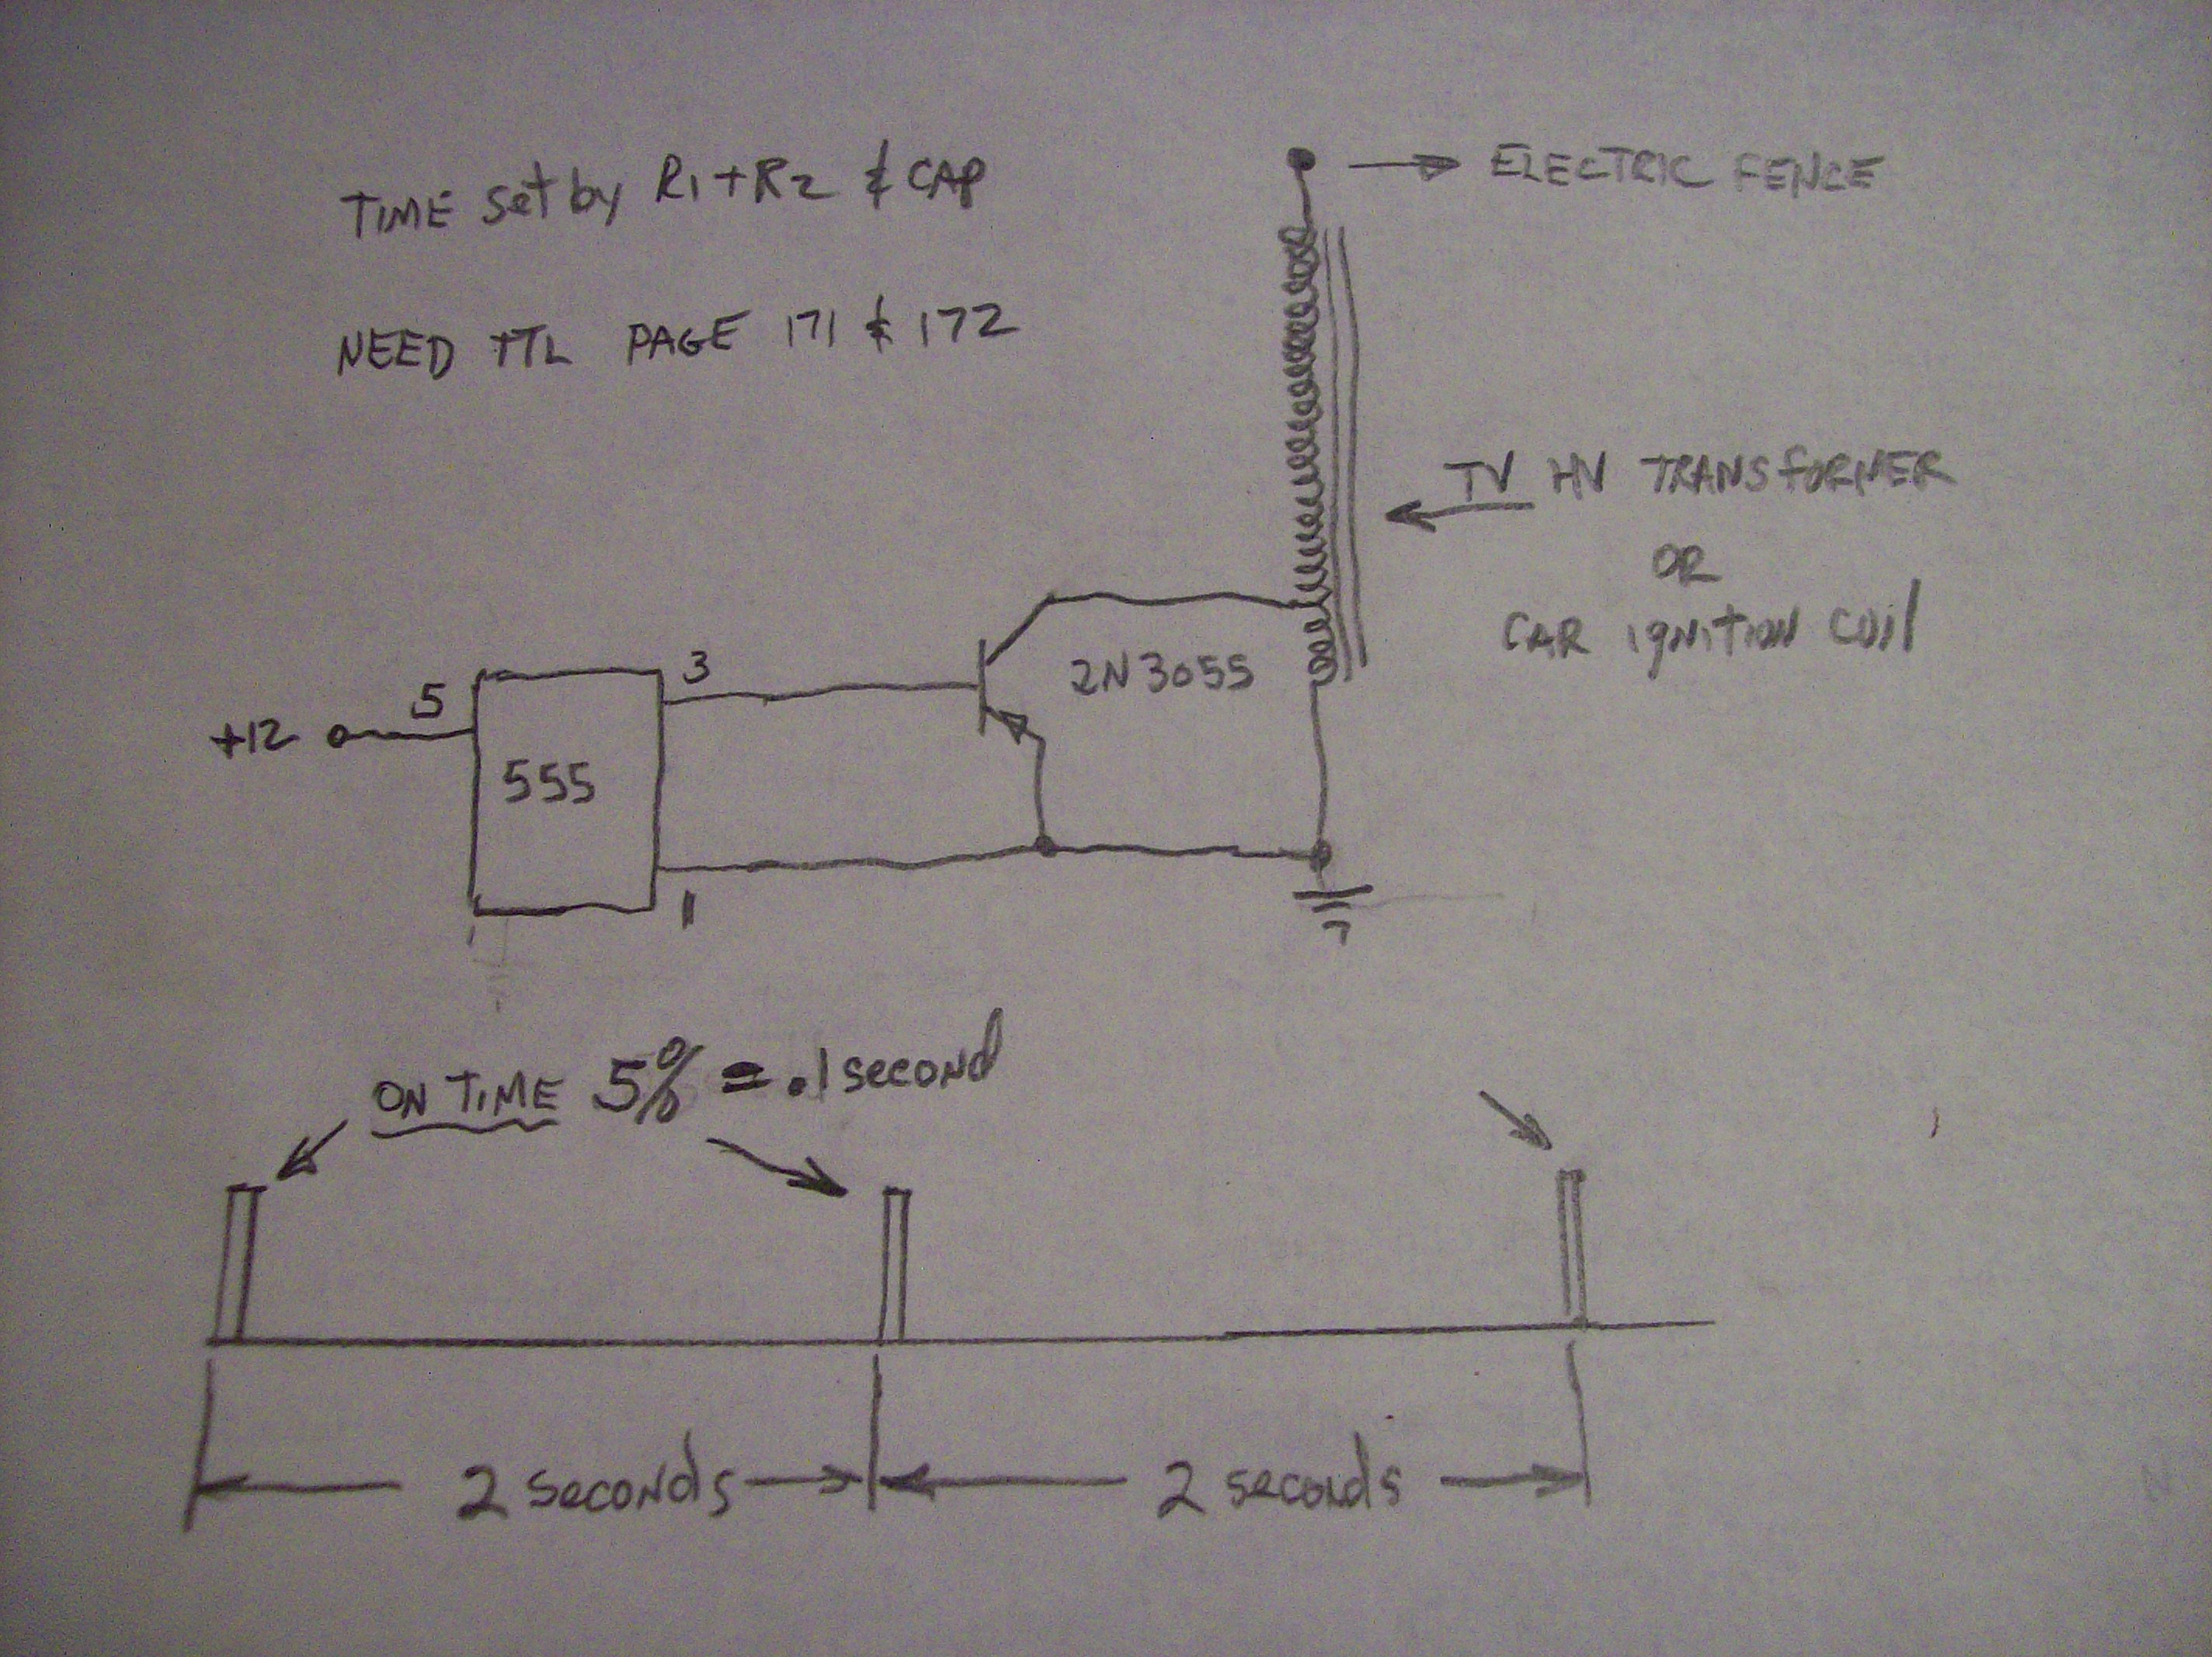 Need TTL Cookbook page 171 & 172. 555 timer 2N3055 vintage Electric Fence  Charger | Electronics Forum (Circuits, Projects and Microcontrollers)  Vintage Electric Fence Charger Wiring Diagrams    Electro-Tech-Online